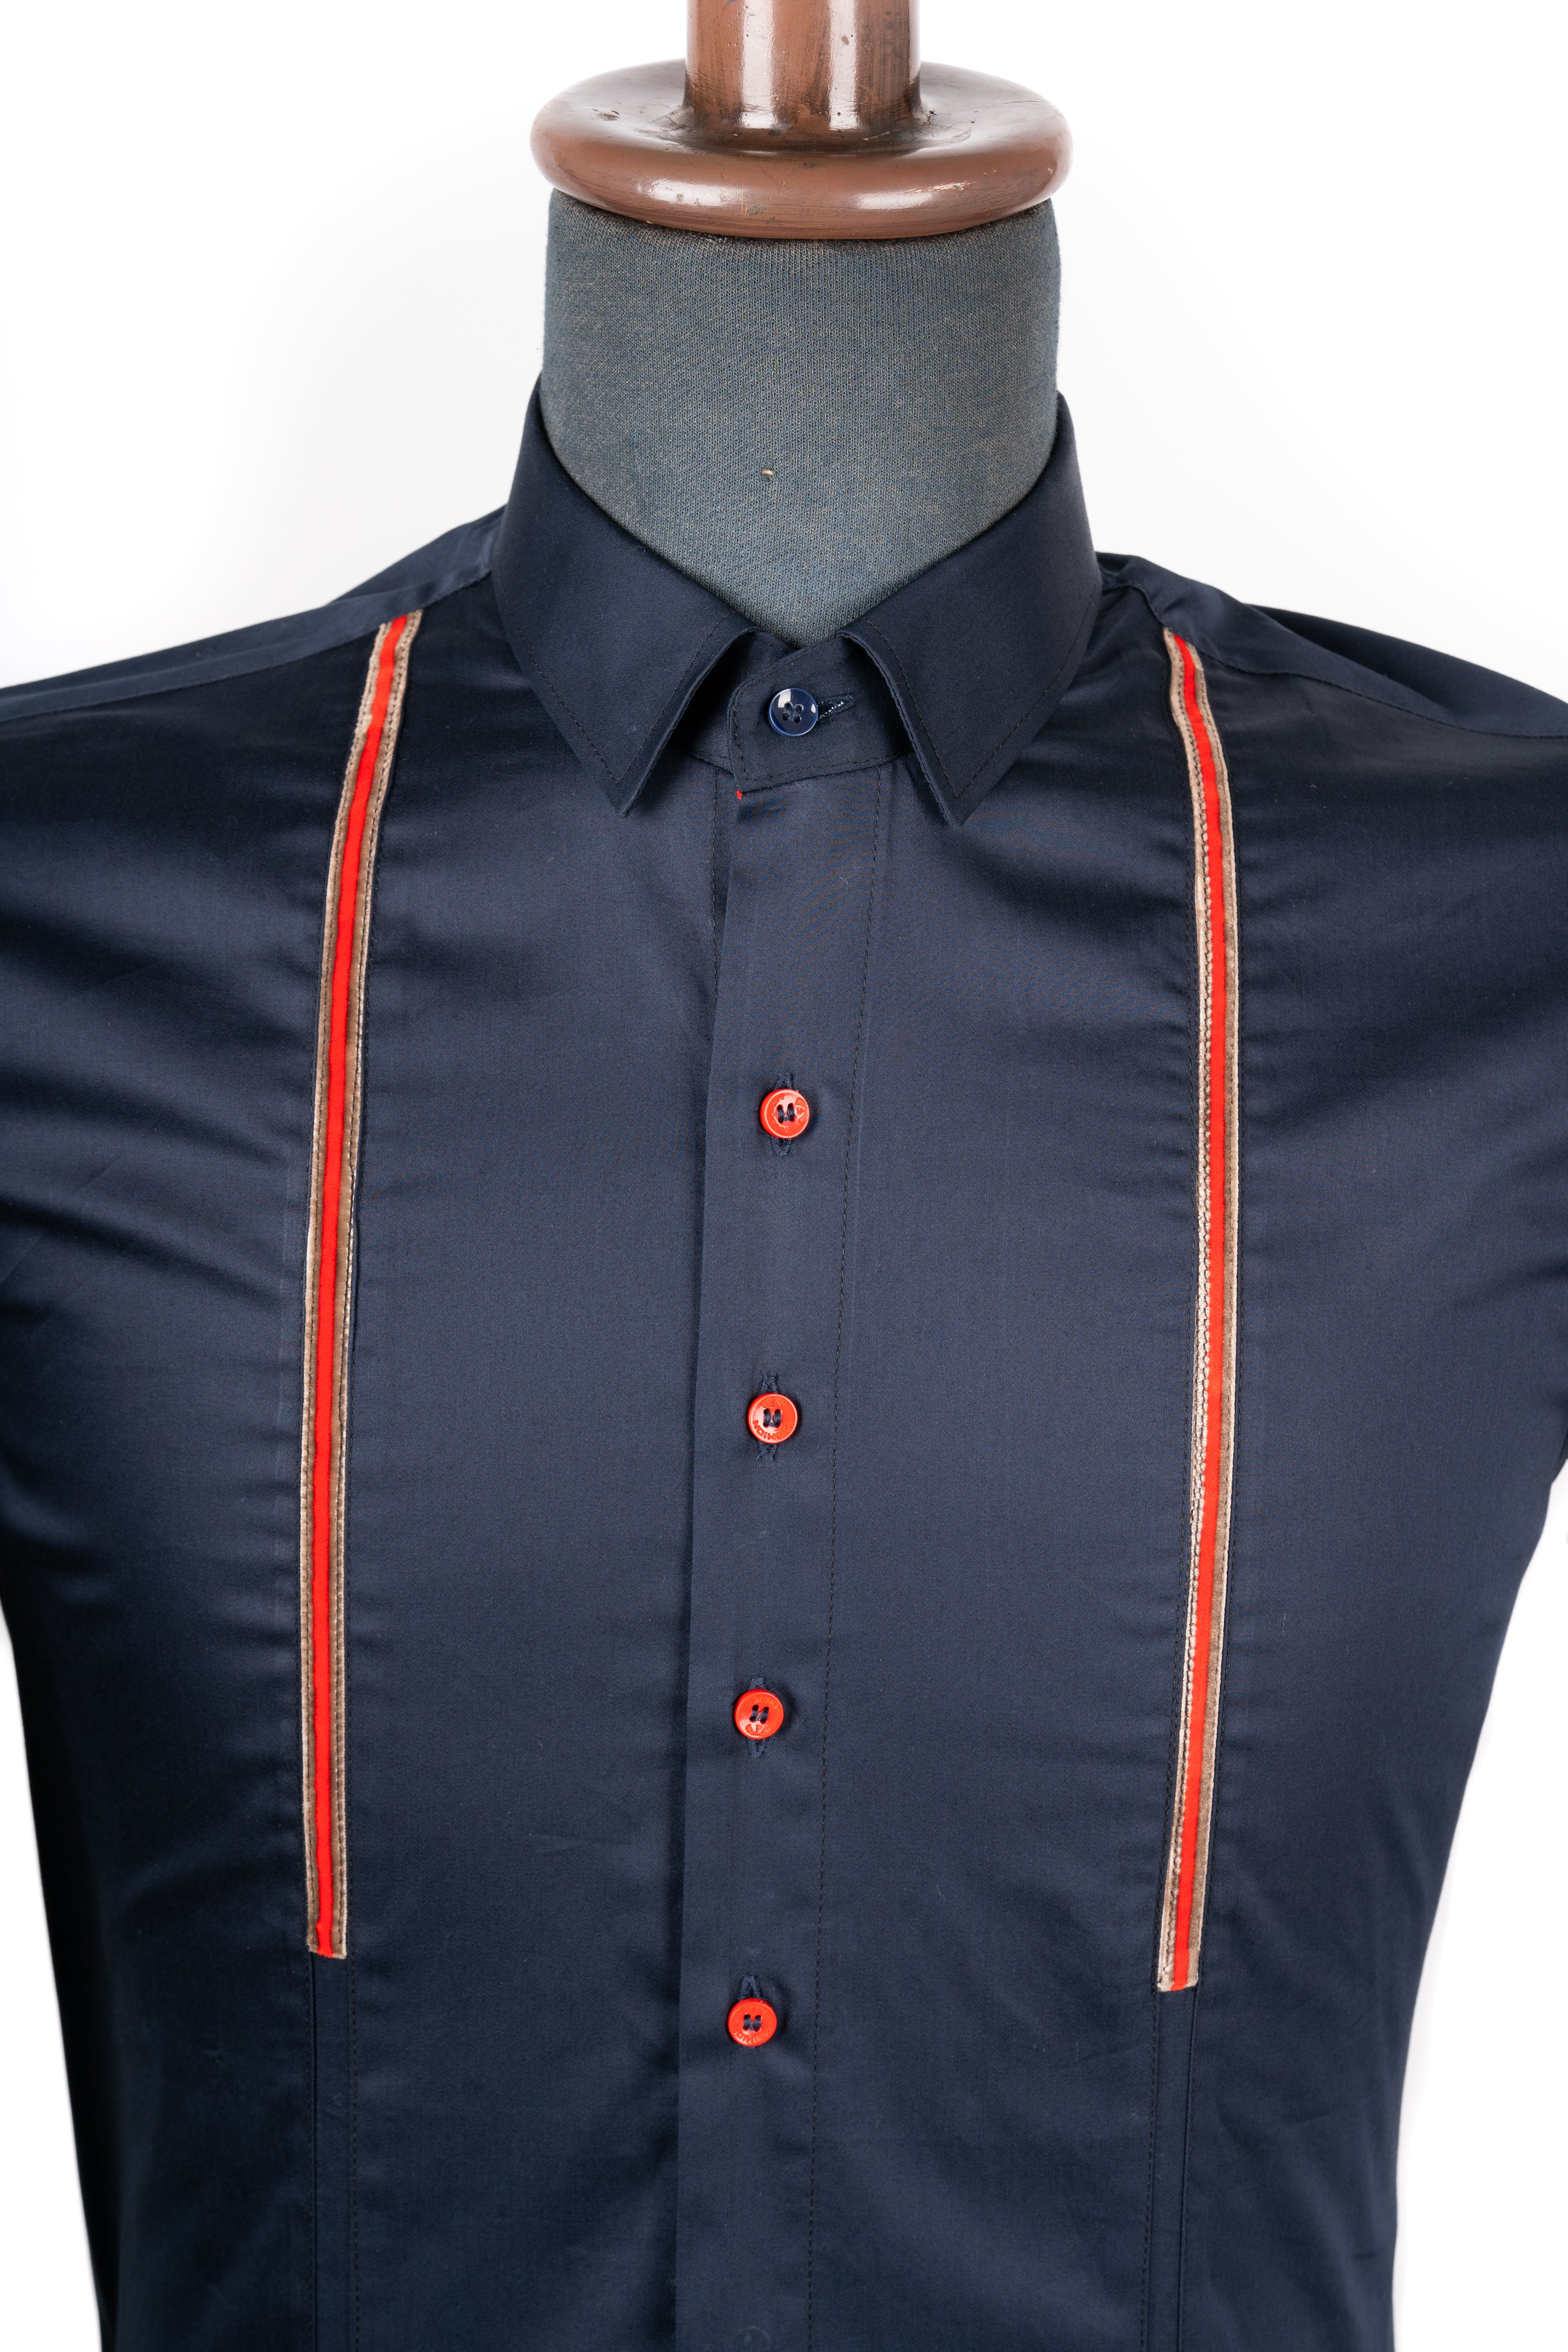 Navy blue shirt with embedded red lace